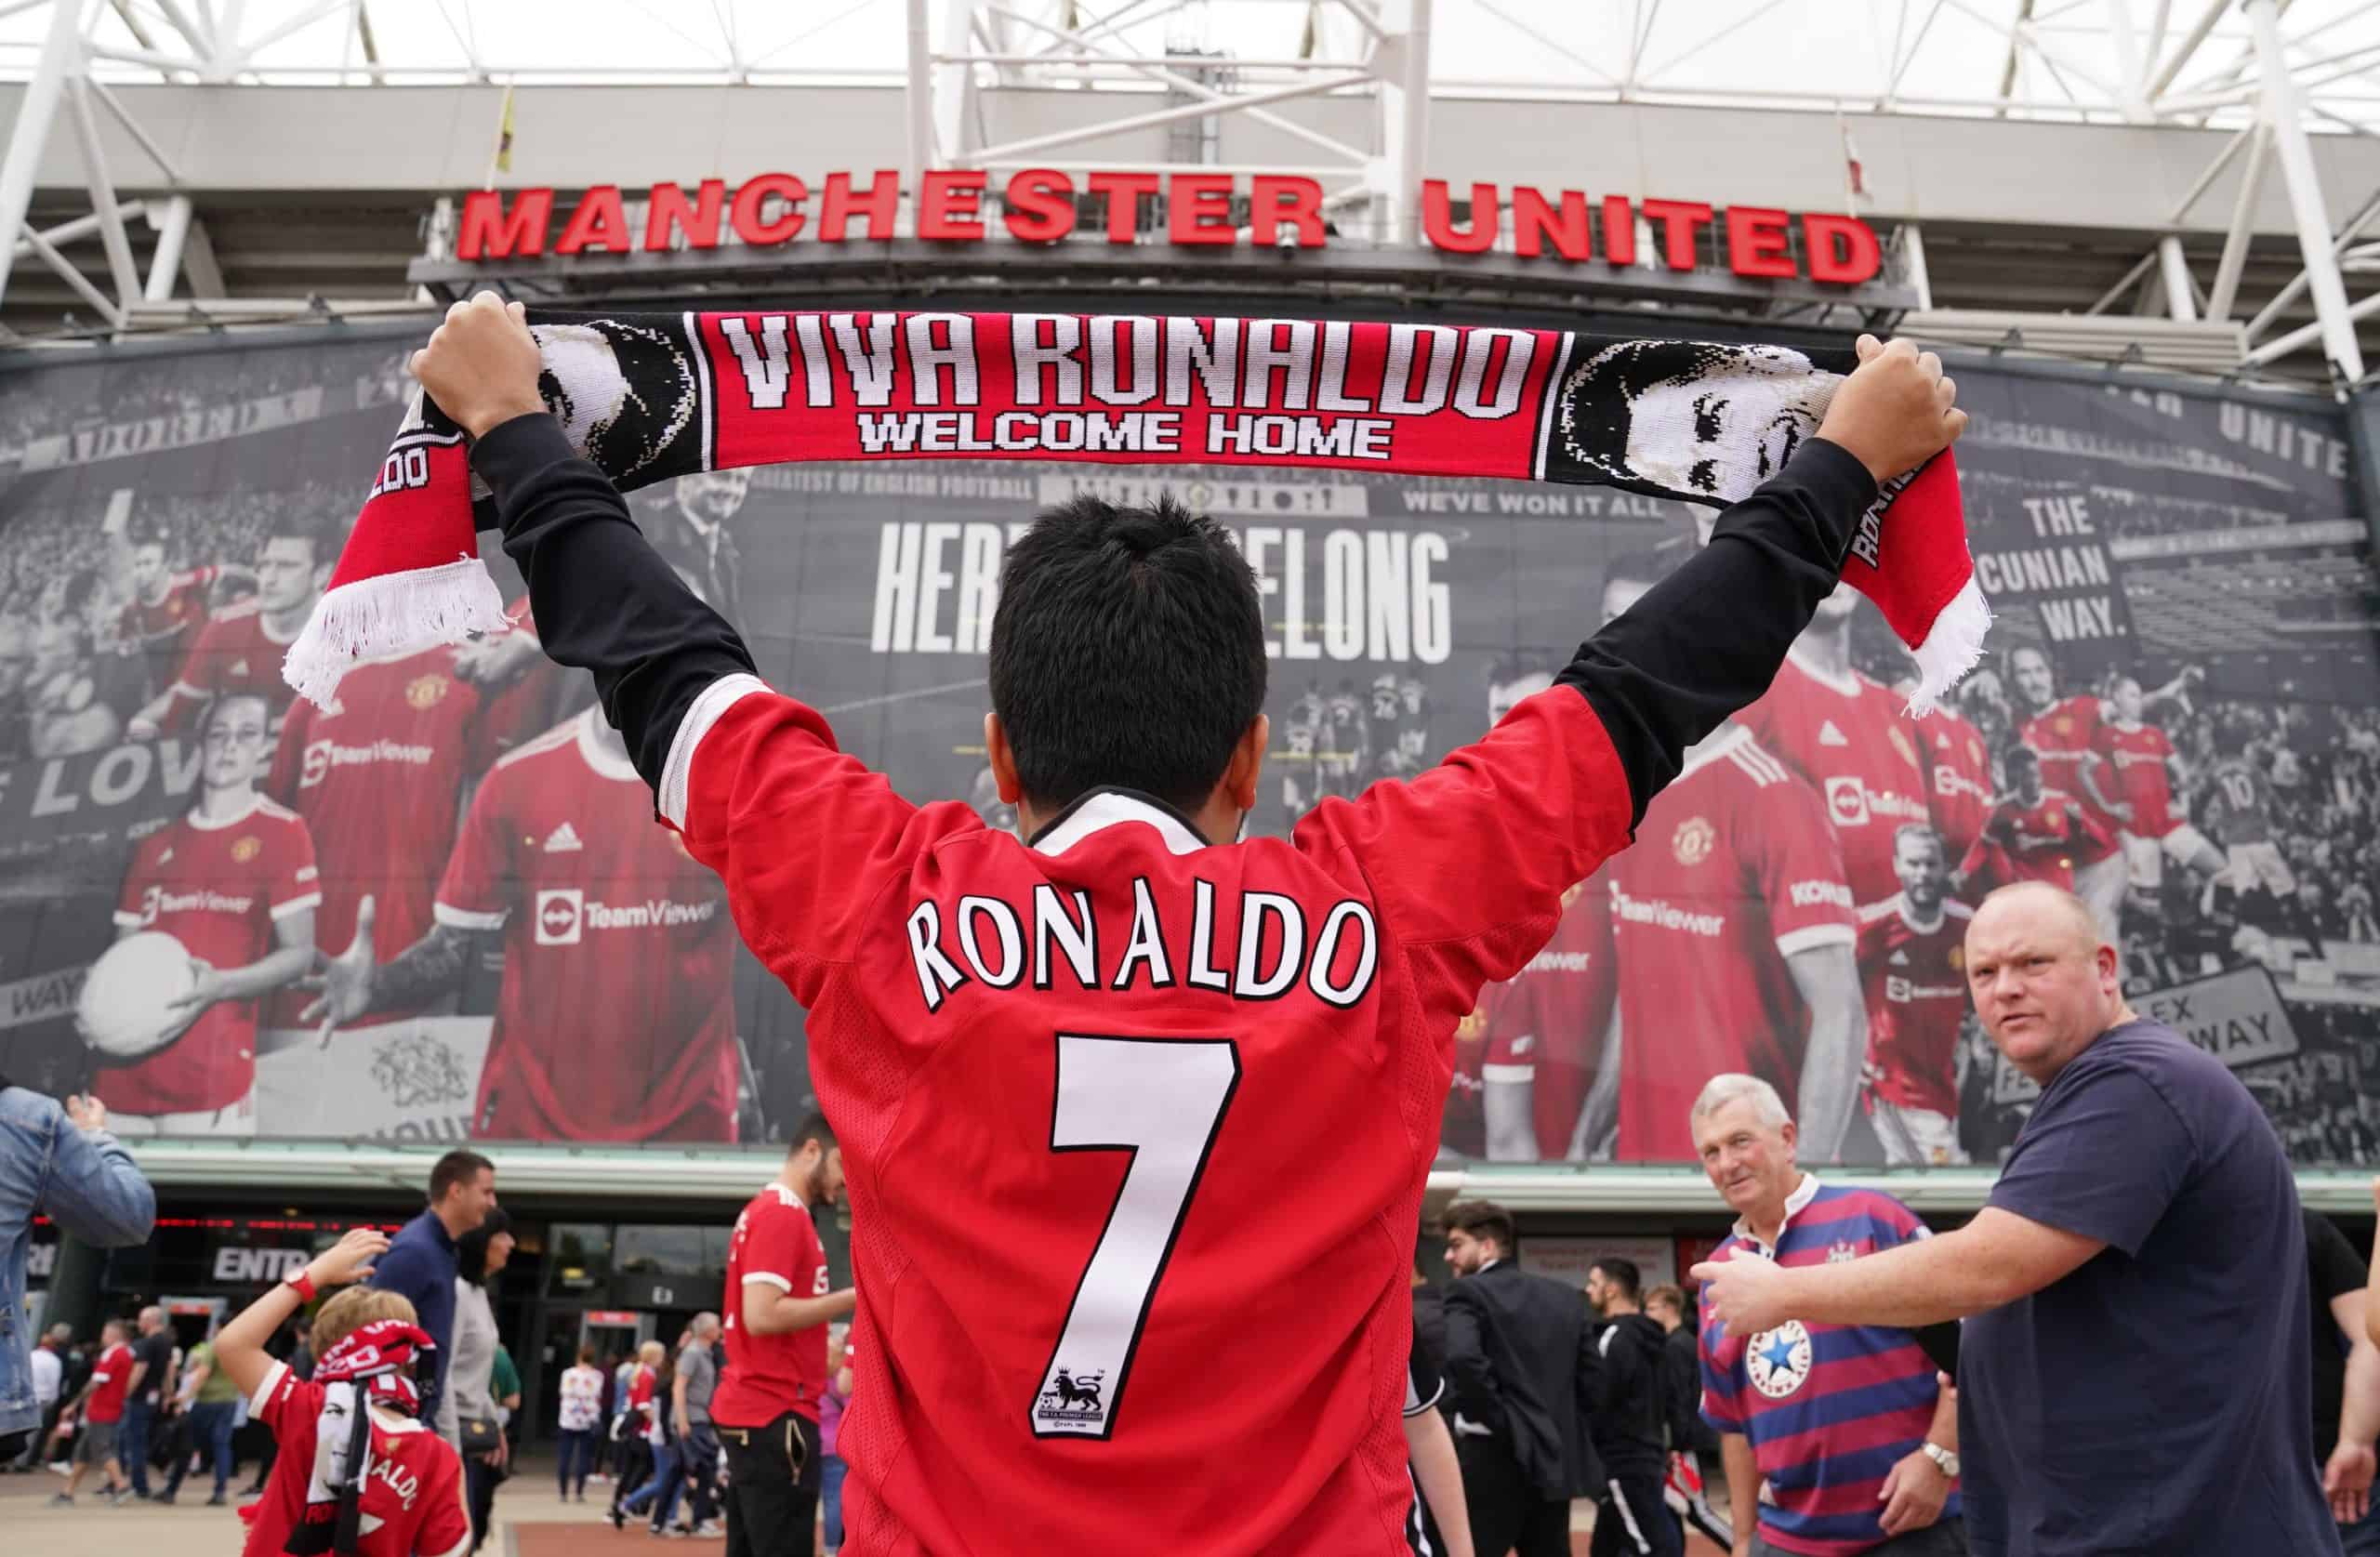 Sorry, Cristiano: Just 14 per cent of United fans live in Manchester